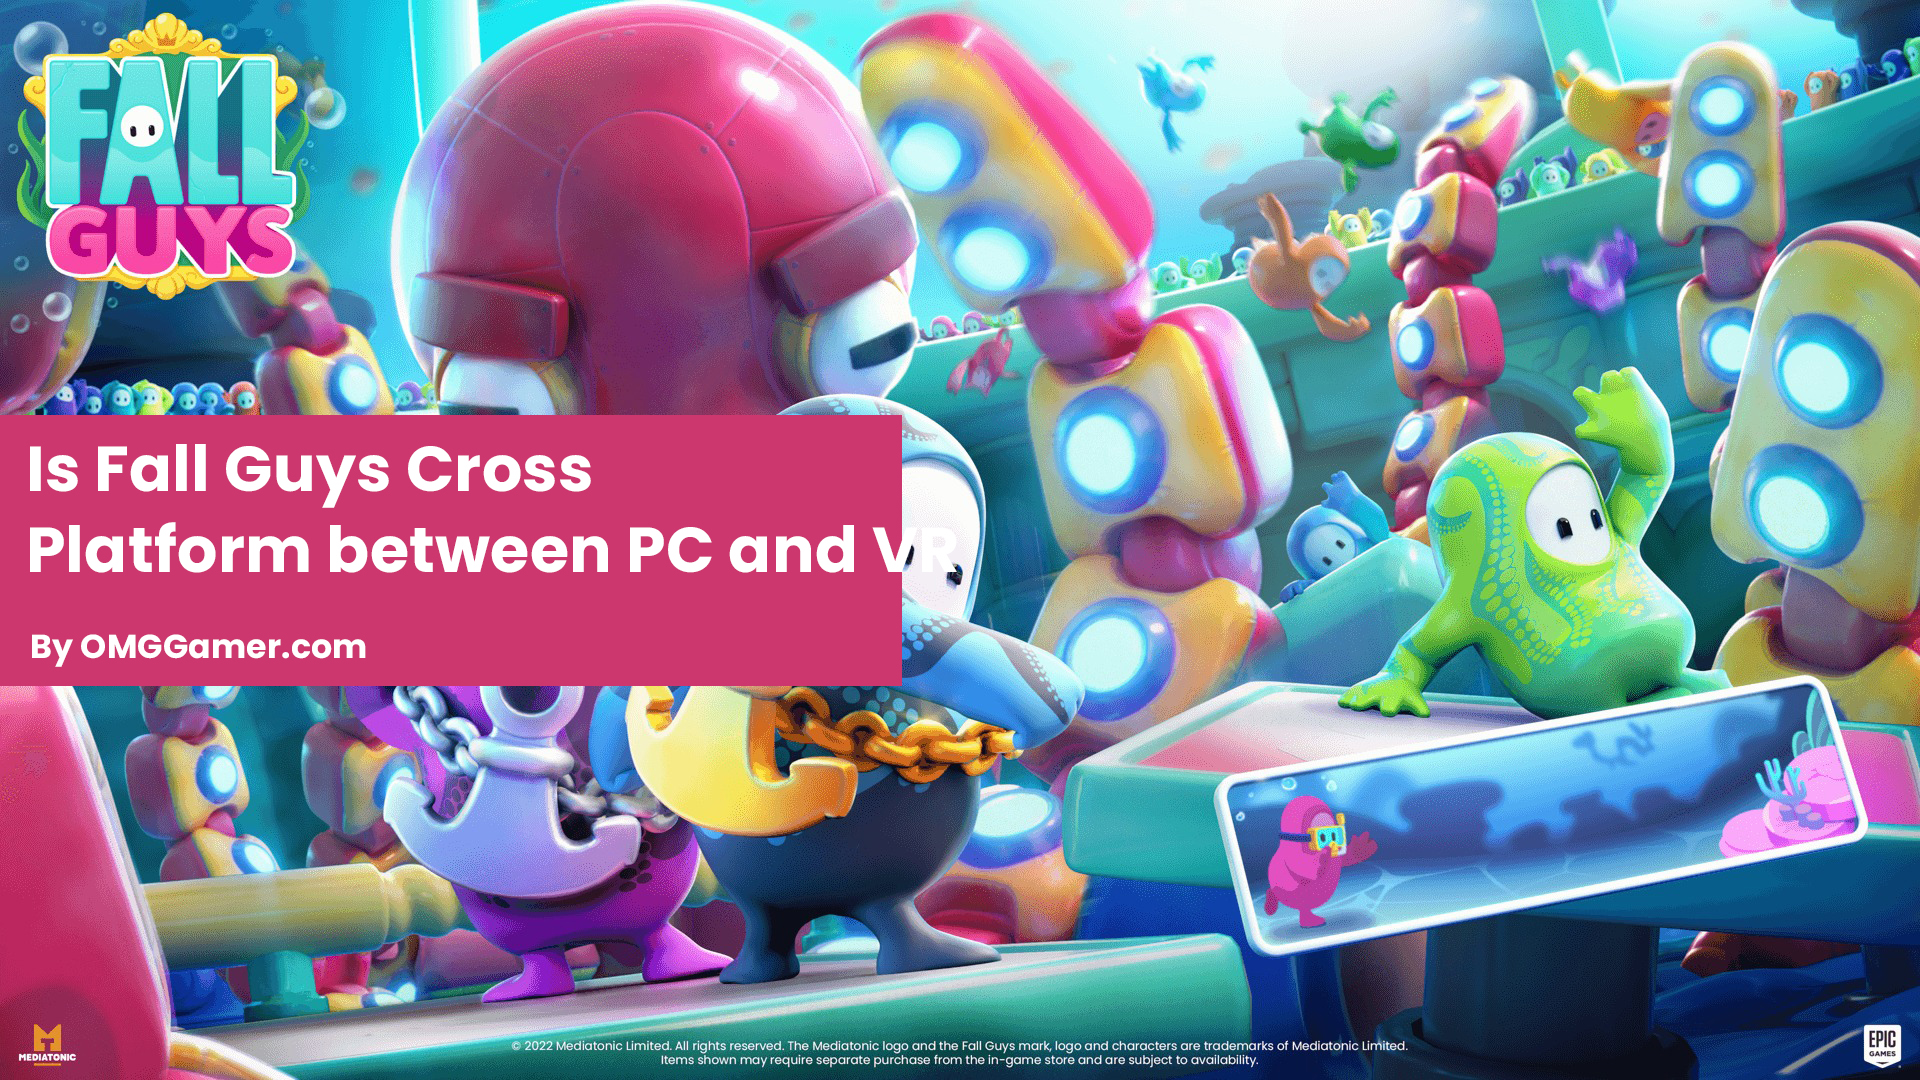 Is Fall Guys Cross Platform between PC and VR